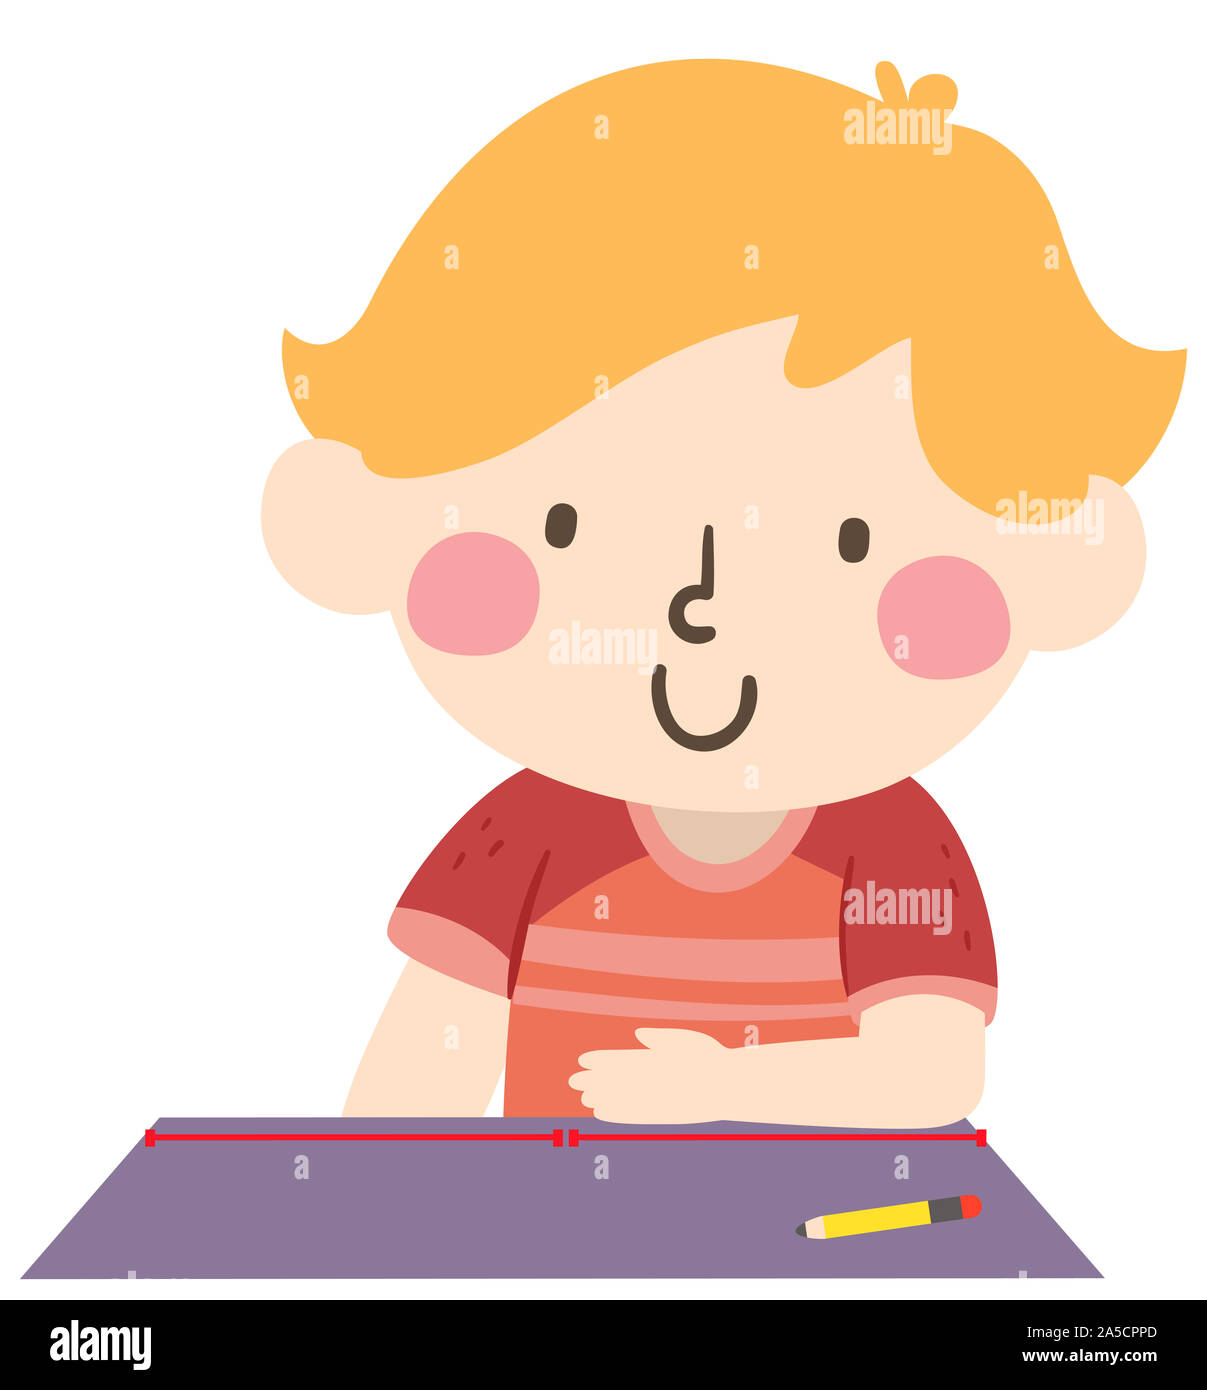 Illustration of a Kid Boy Showing an Arbitrary Non Standard Cubit Measurement on Table Stock Photo